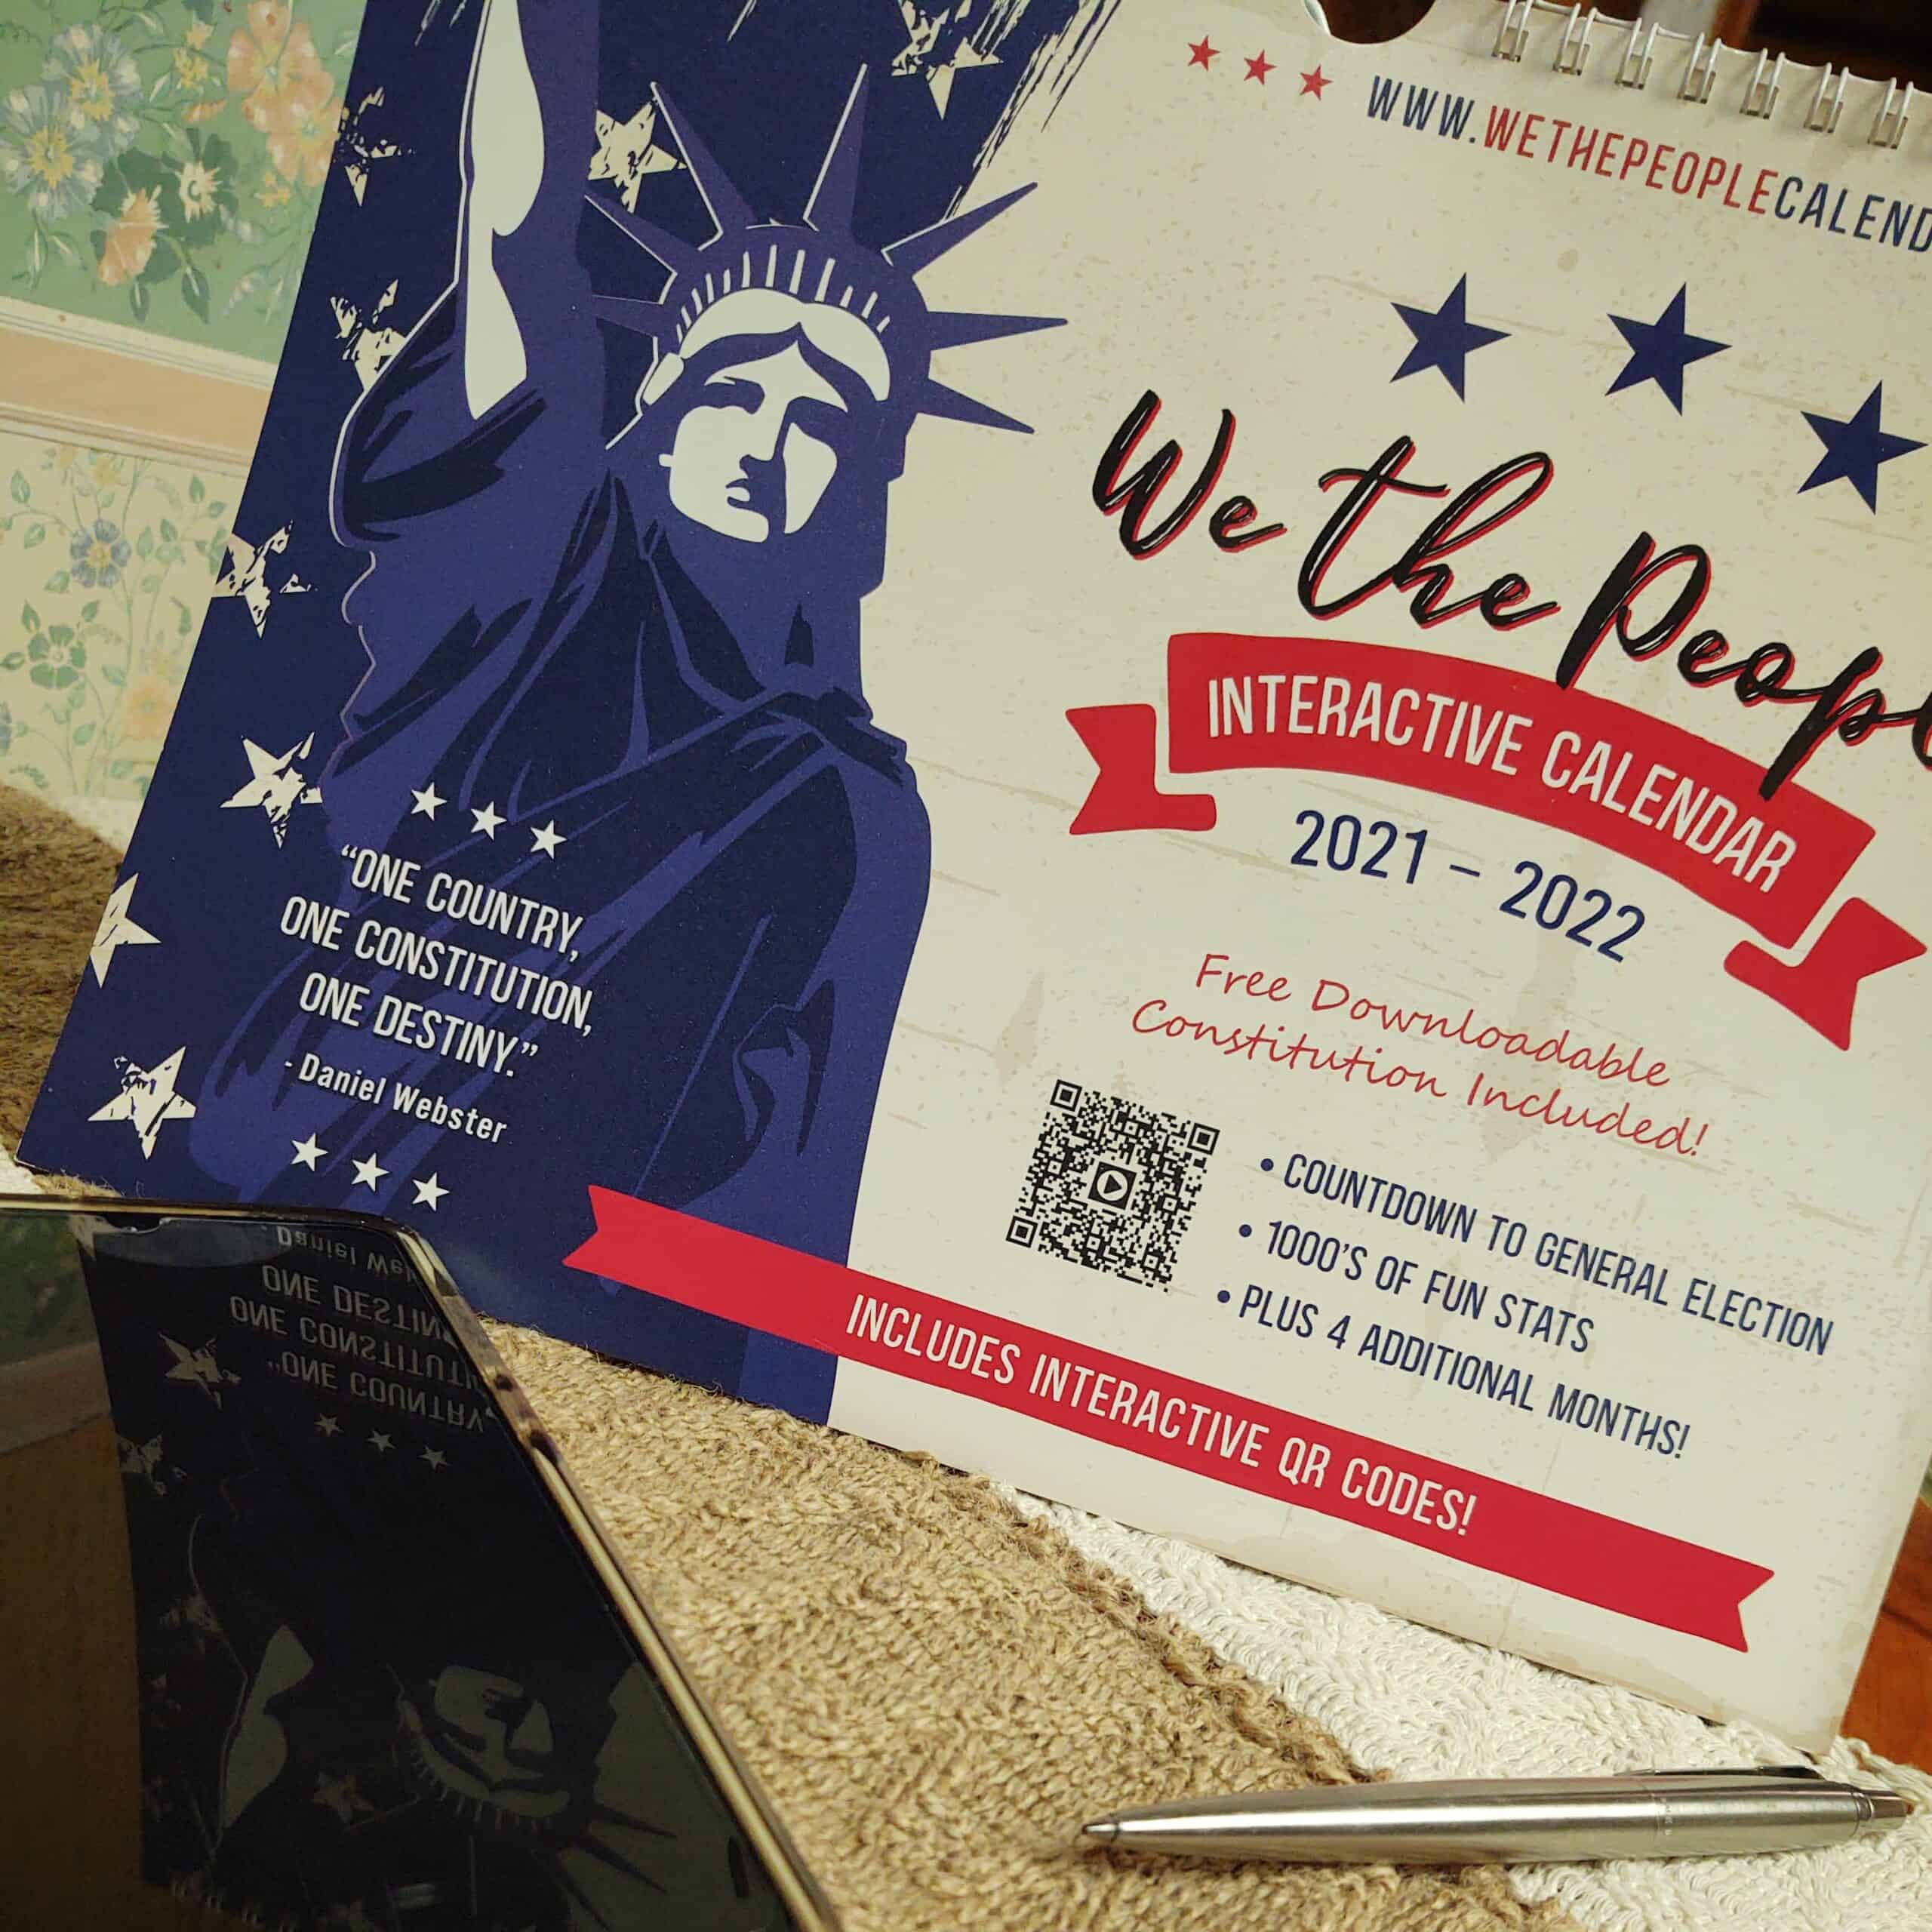 we-the-people-2022-interactive-calendar-shop-at-the-pamphlet